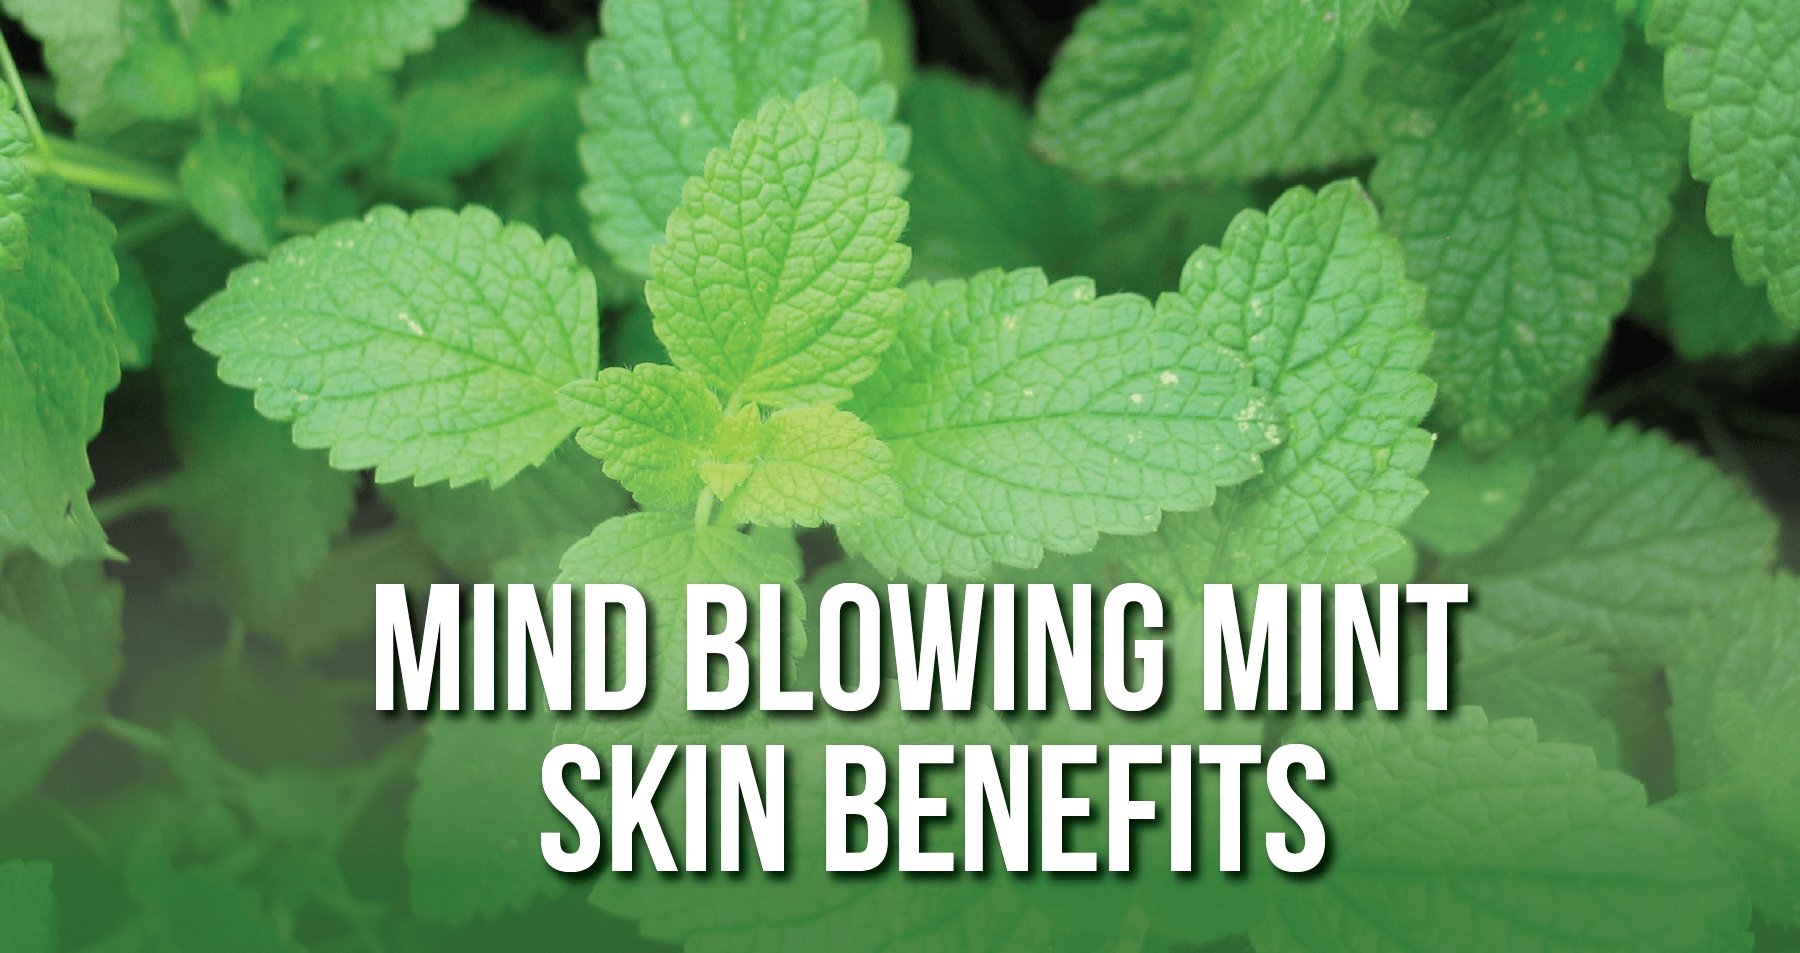 Mind Blowing Mint Skin Benefits | iHeart Nature